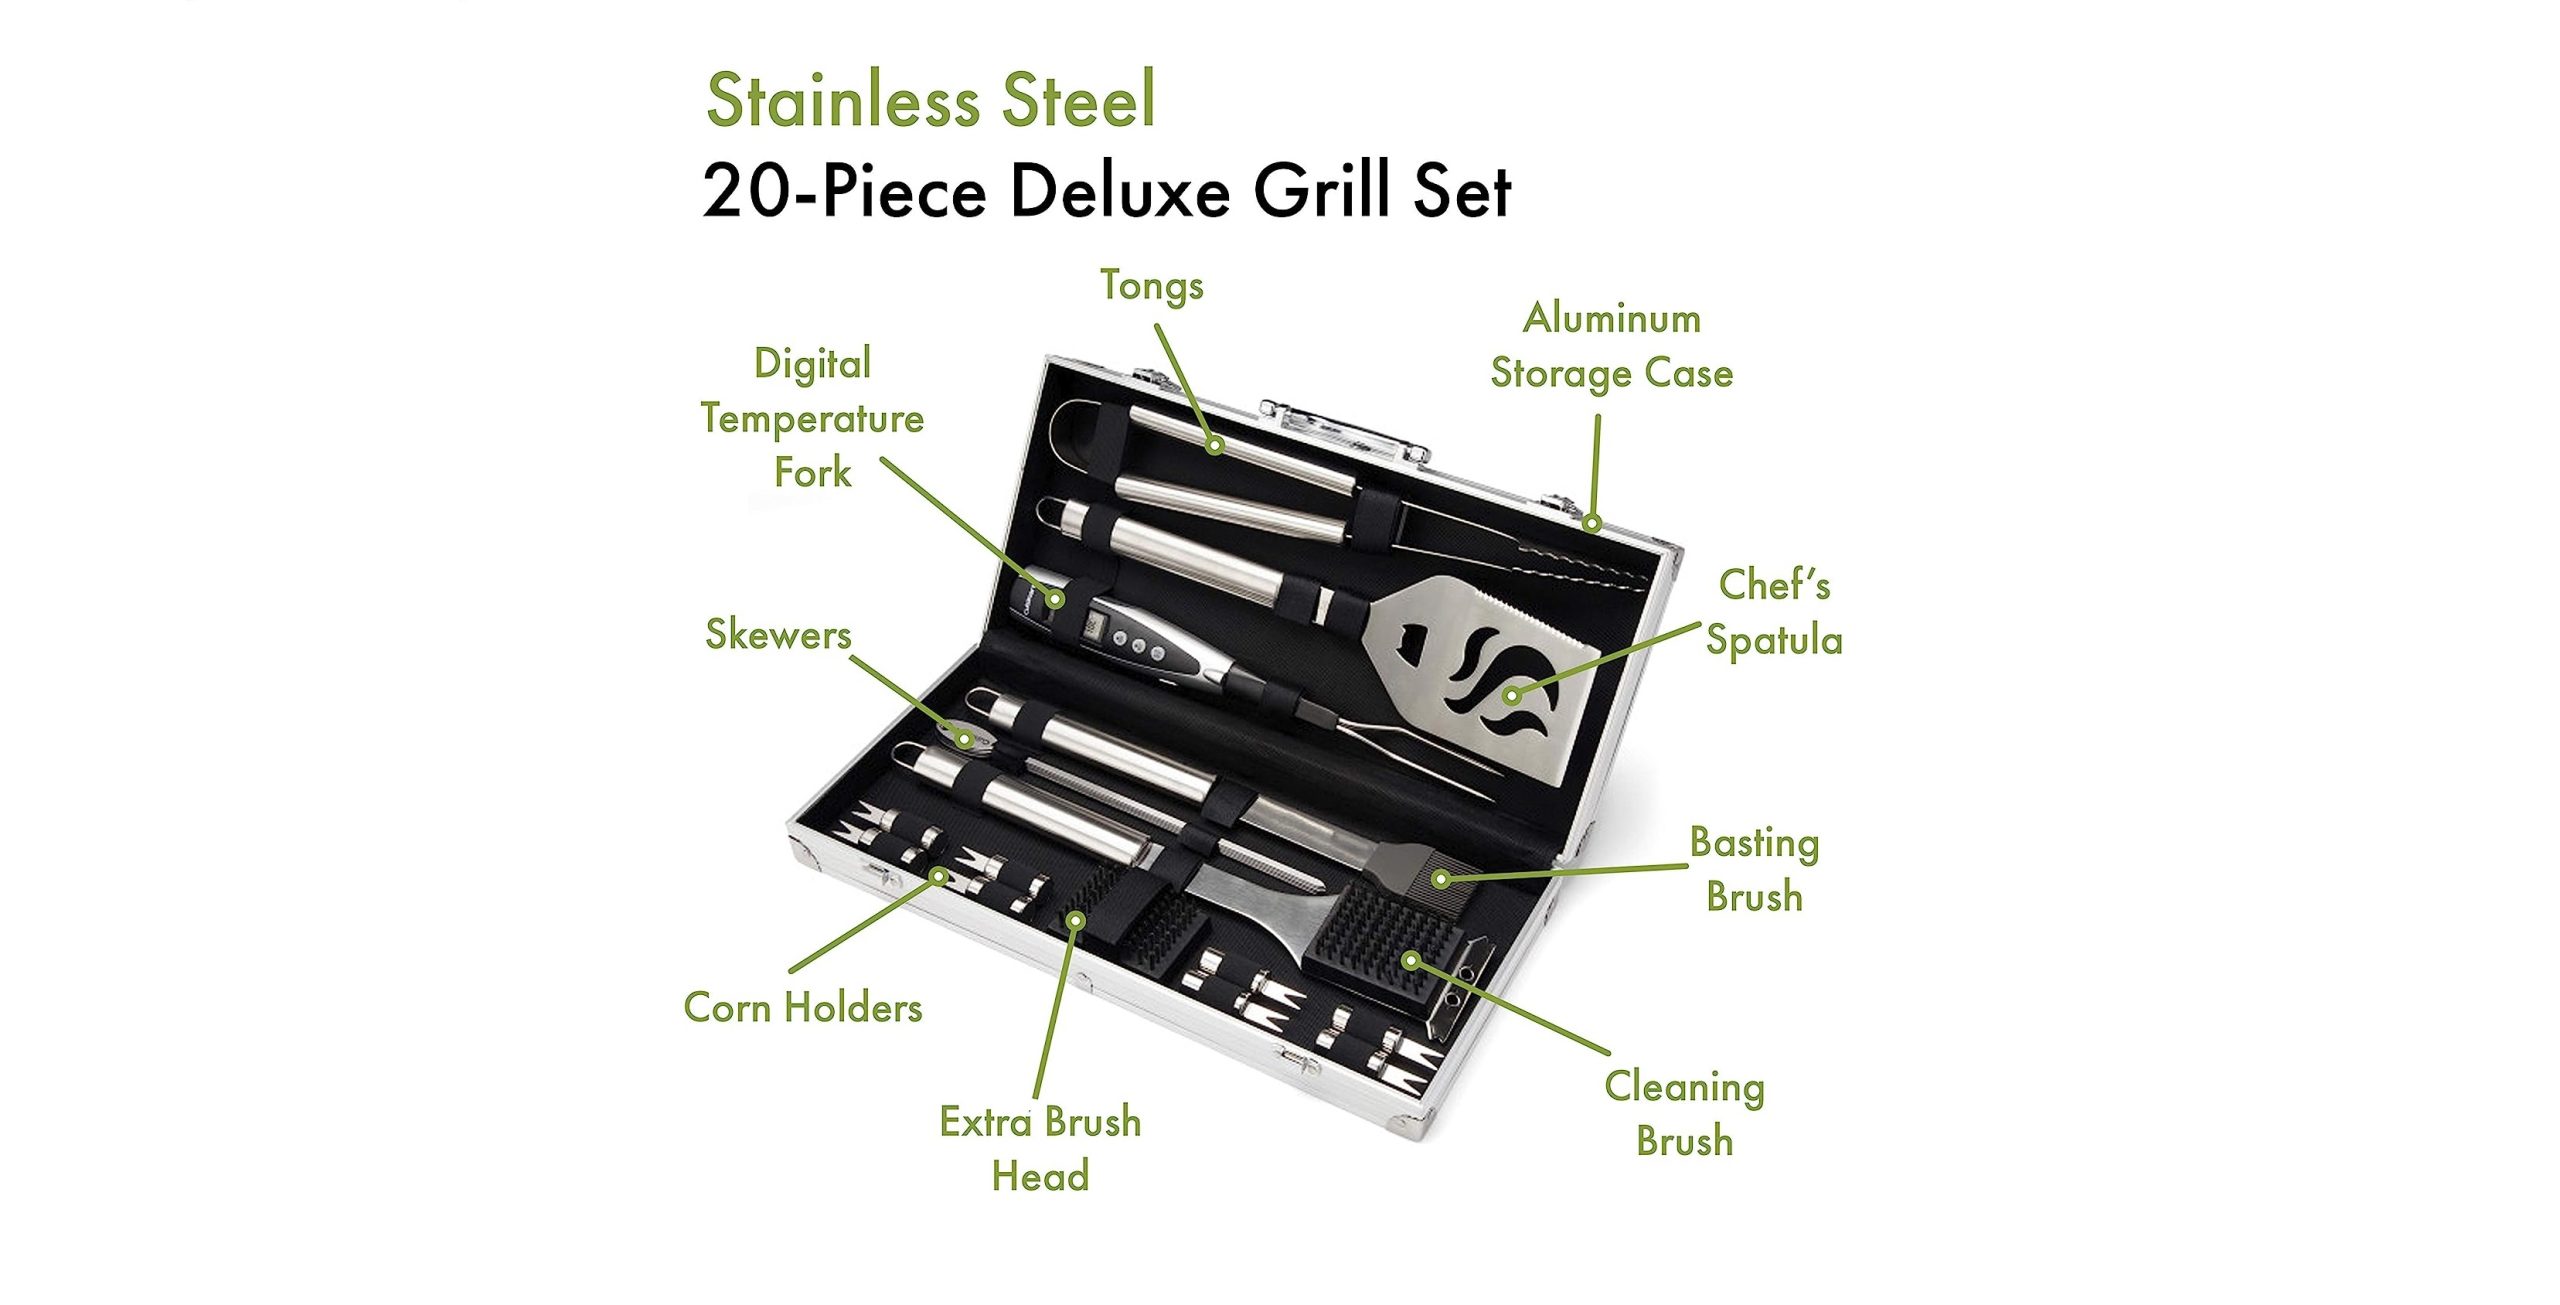 BBQ Grill SET - One Of The Top Christmas Presents for Men